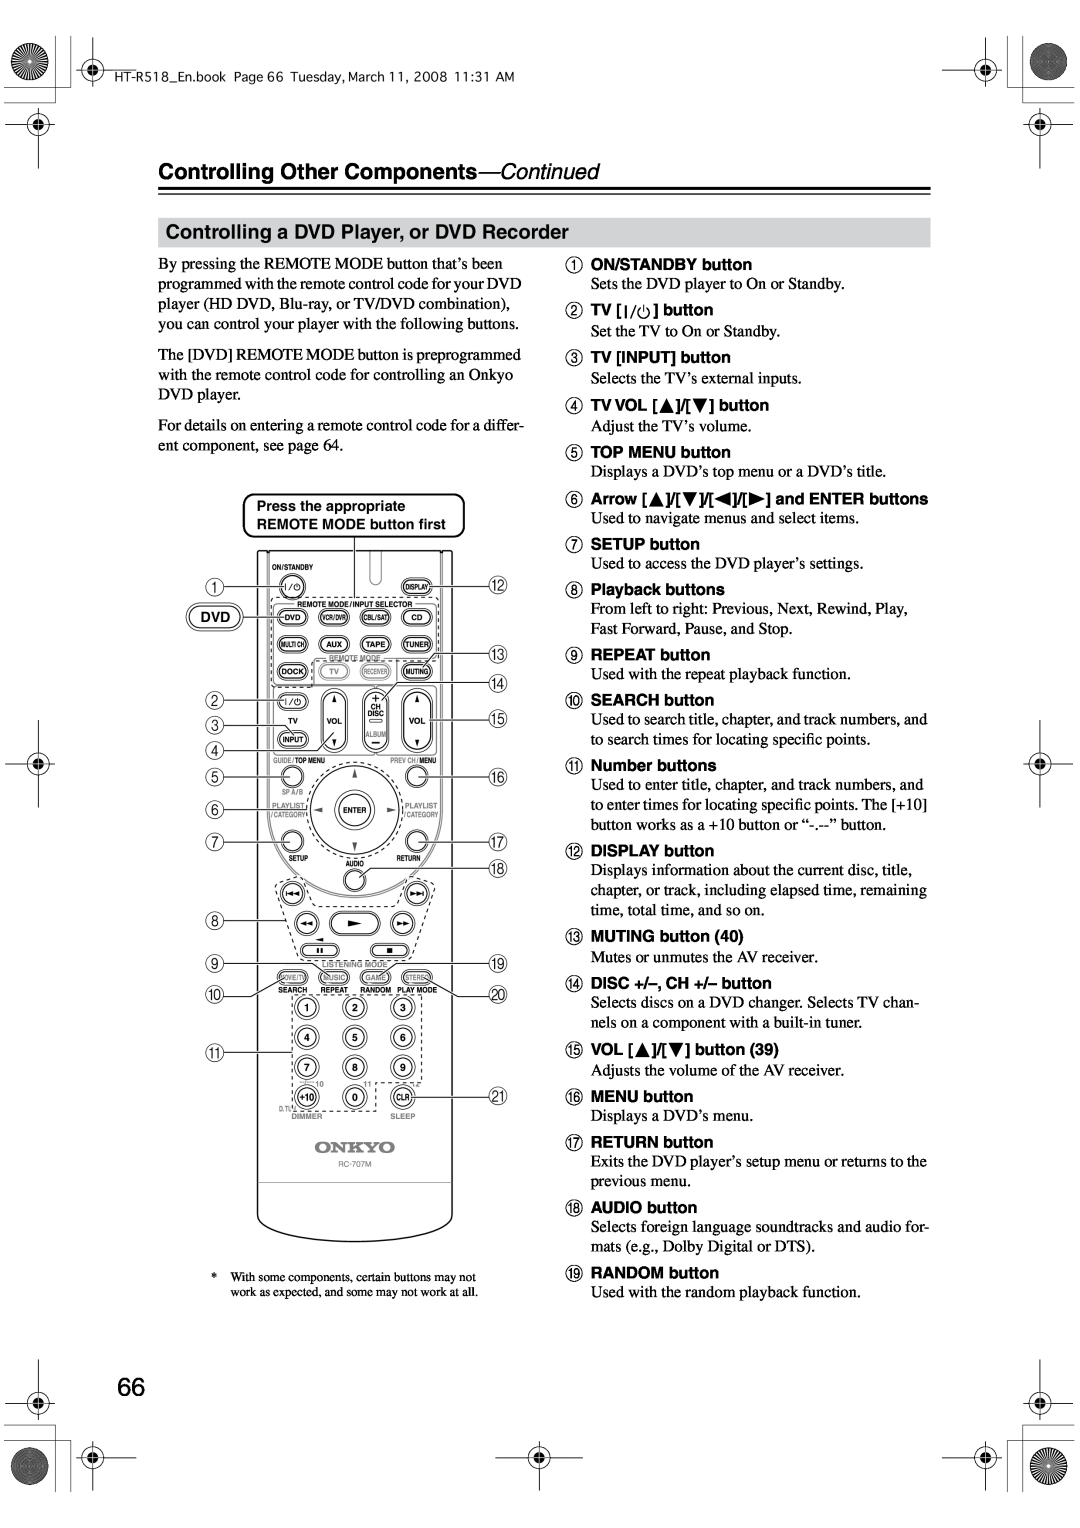 Onkyo HT-R518 instruction manual Controlling a DVD Player, or DVD Recorder, Controlling Other Components-Continued 